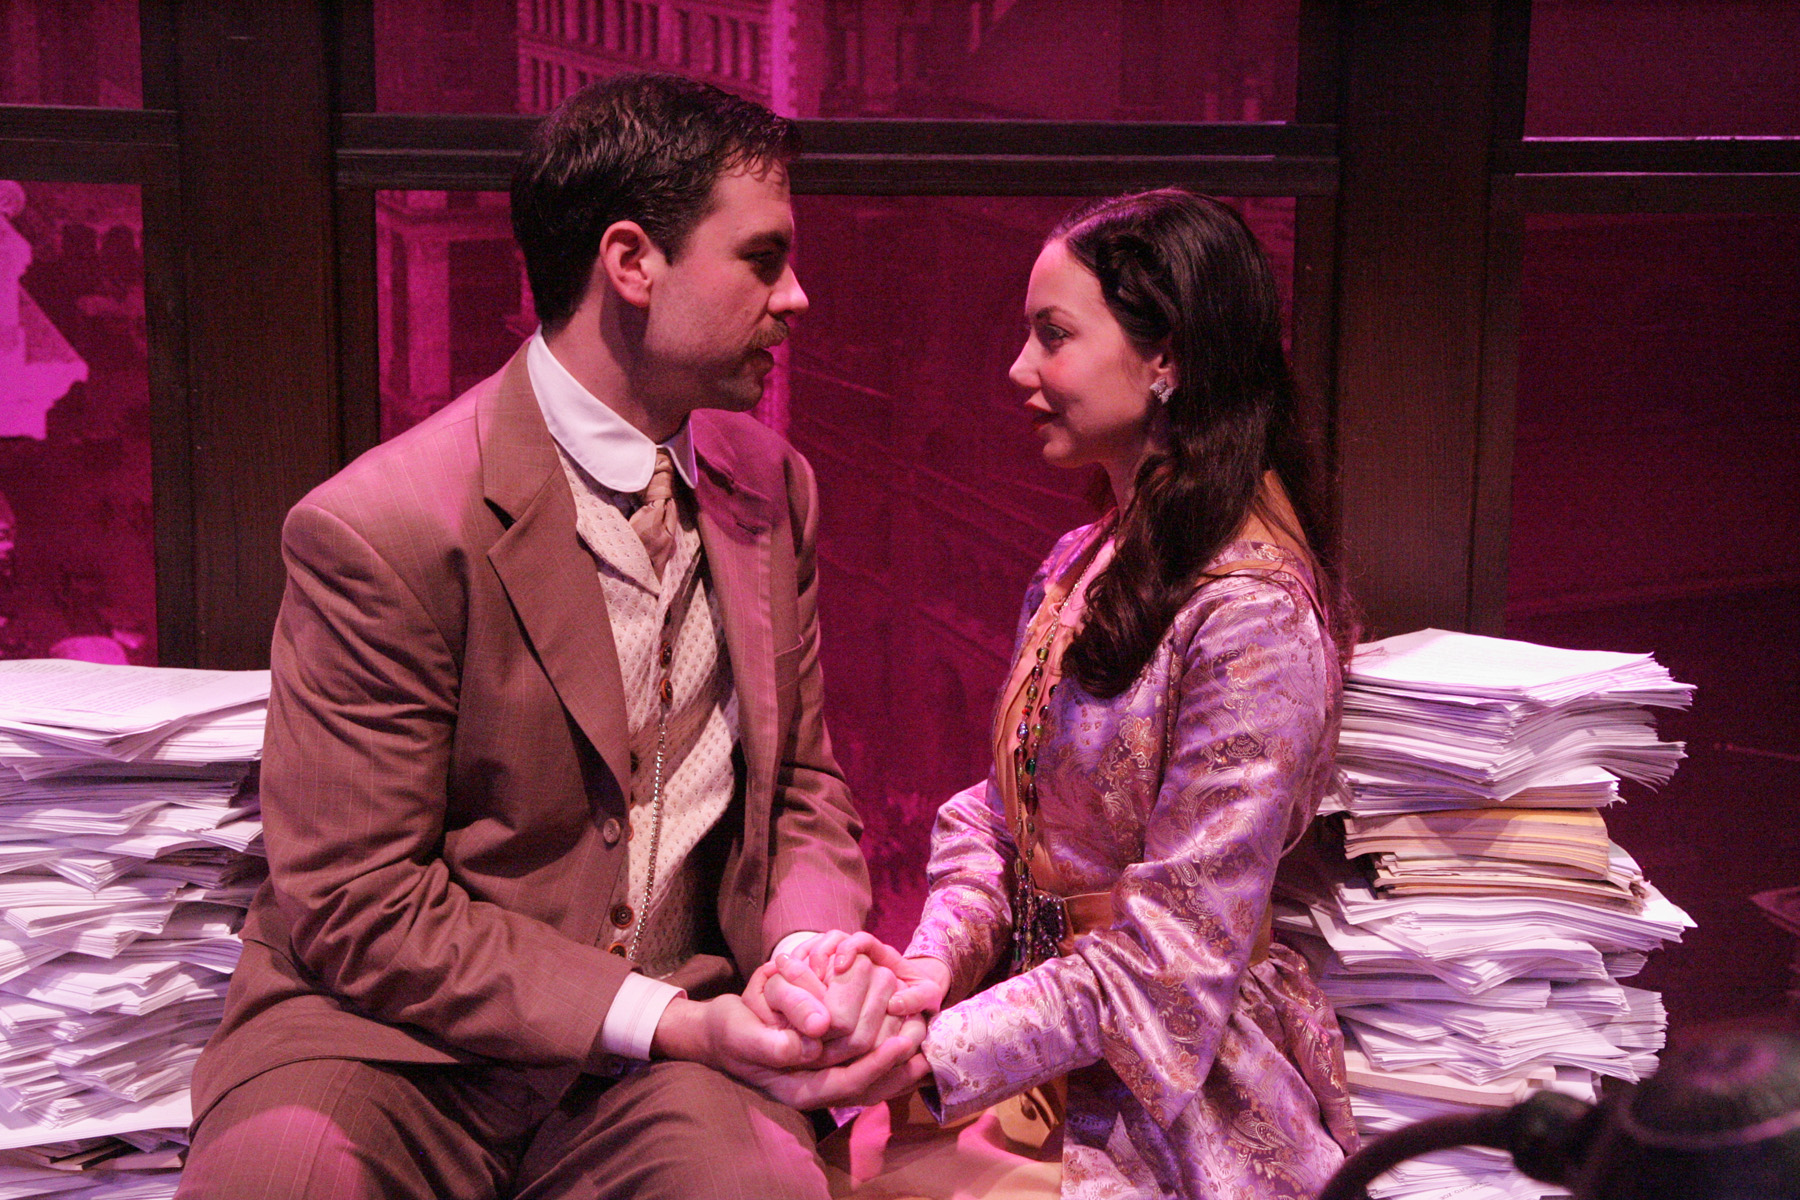 Peter Larney and Lisa Valerie Morgan in The Violet Hour.